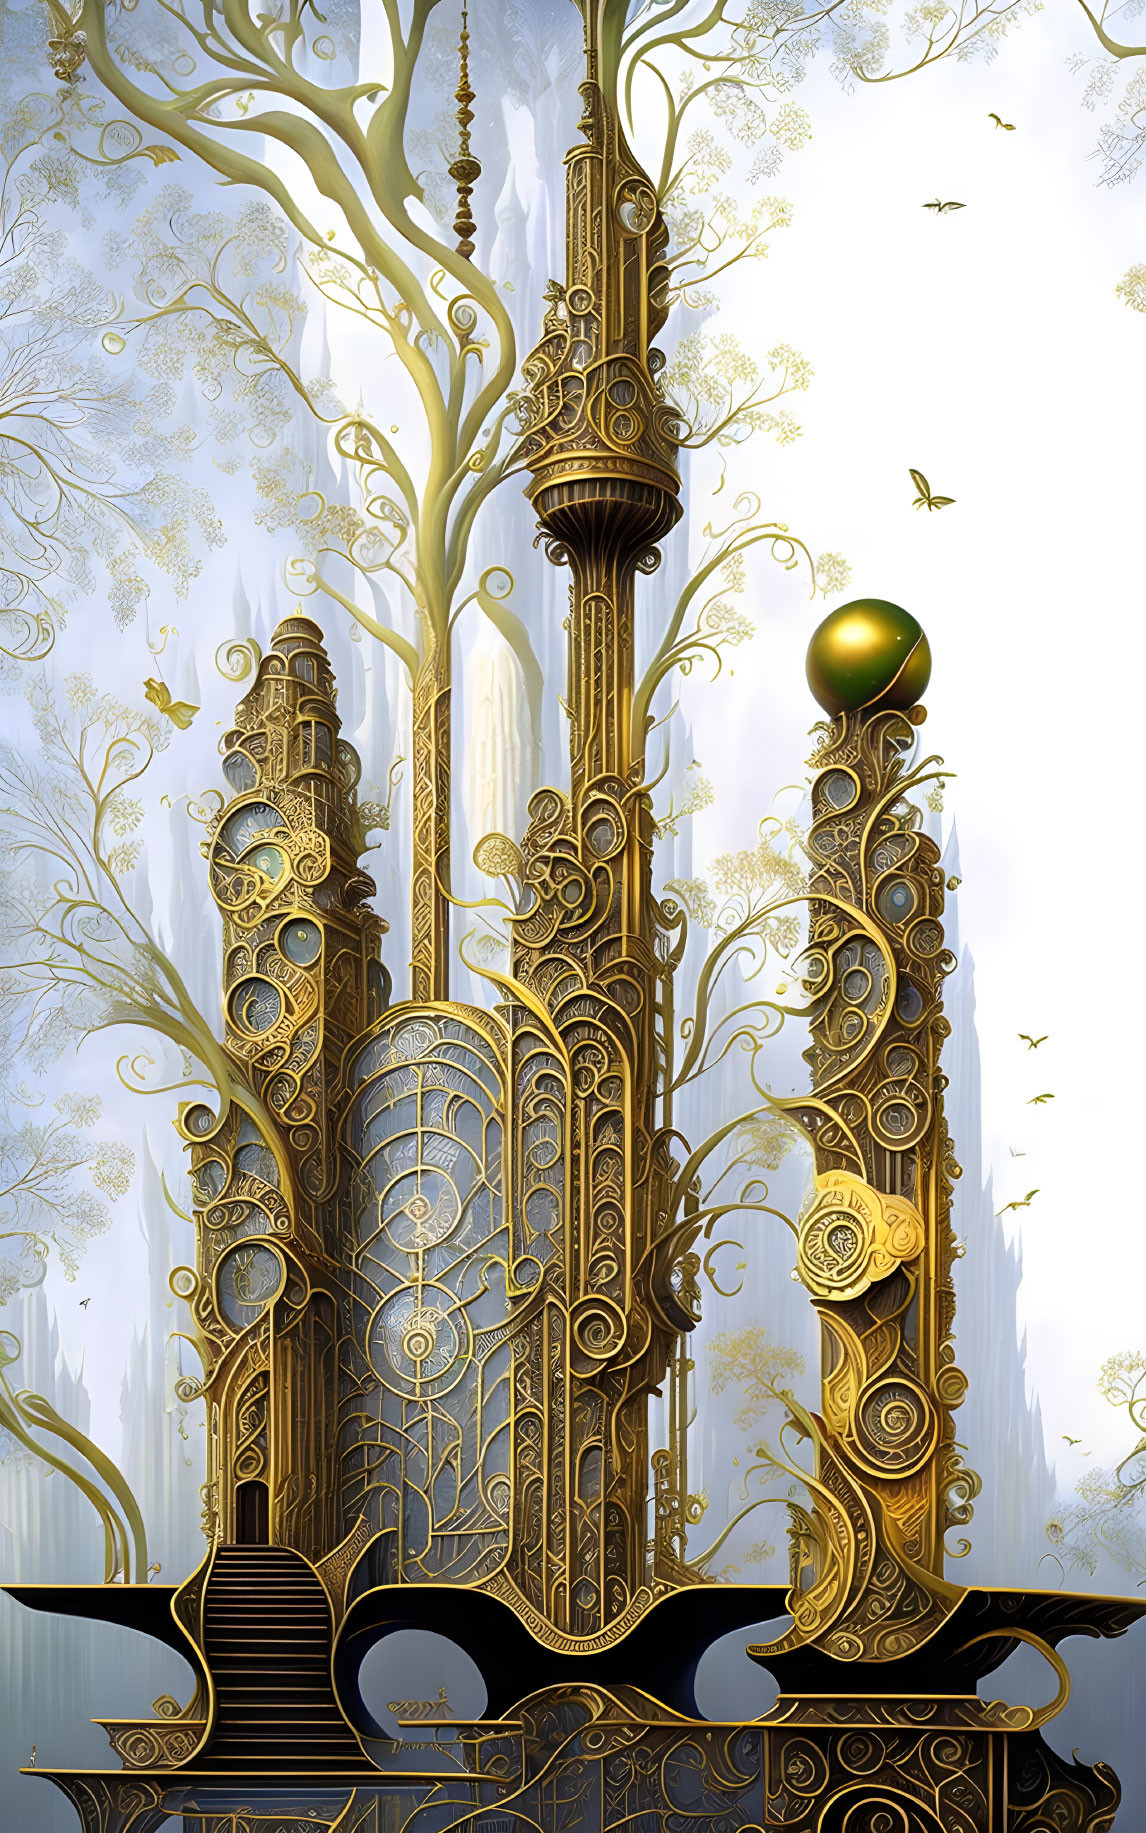 Intricate Golden Fantasy Architecture in Serene Forest